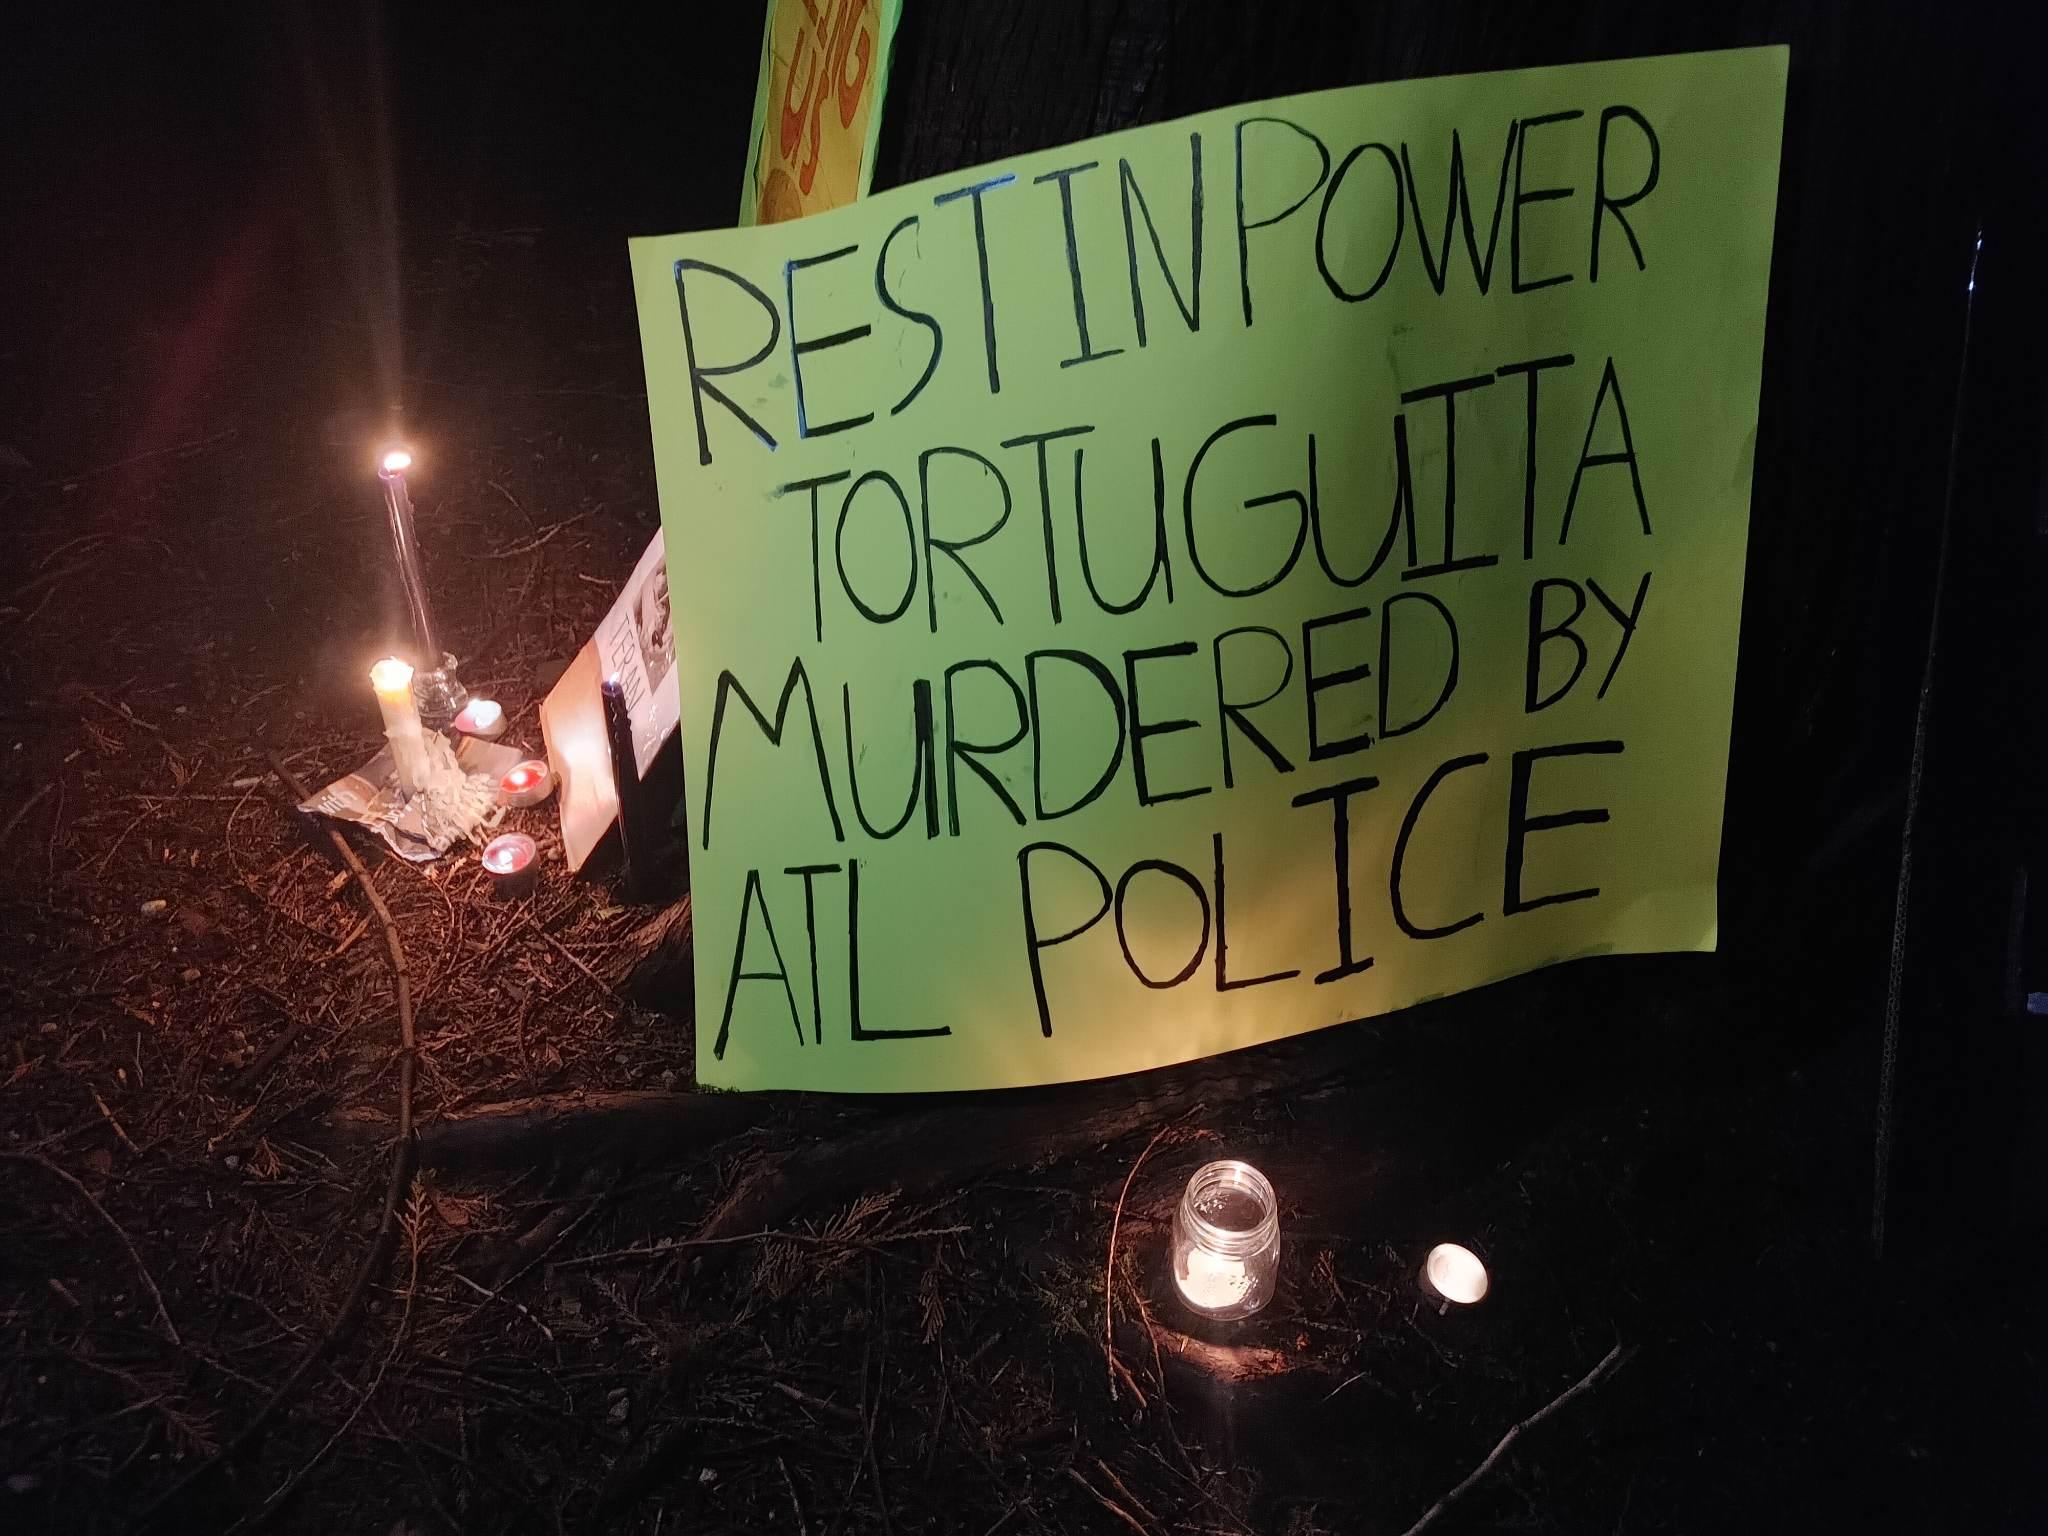 A green sign surrounded by candles reads "REST IN POWER TORTUGUITA MURDERED BY ATL POLICE" in black letters.